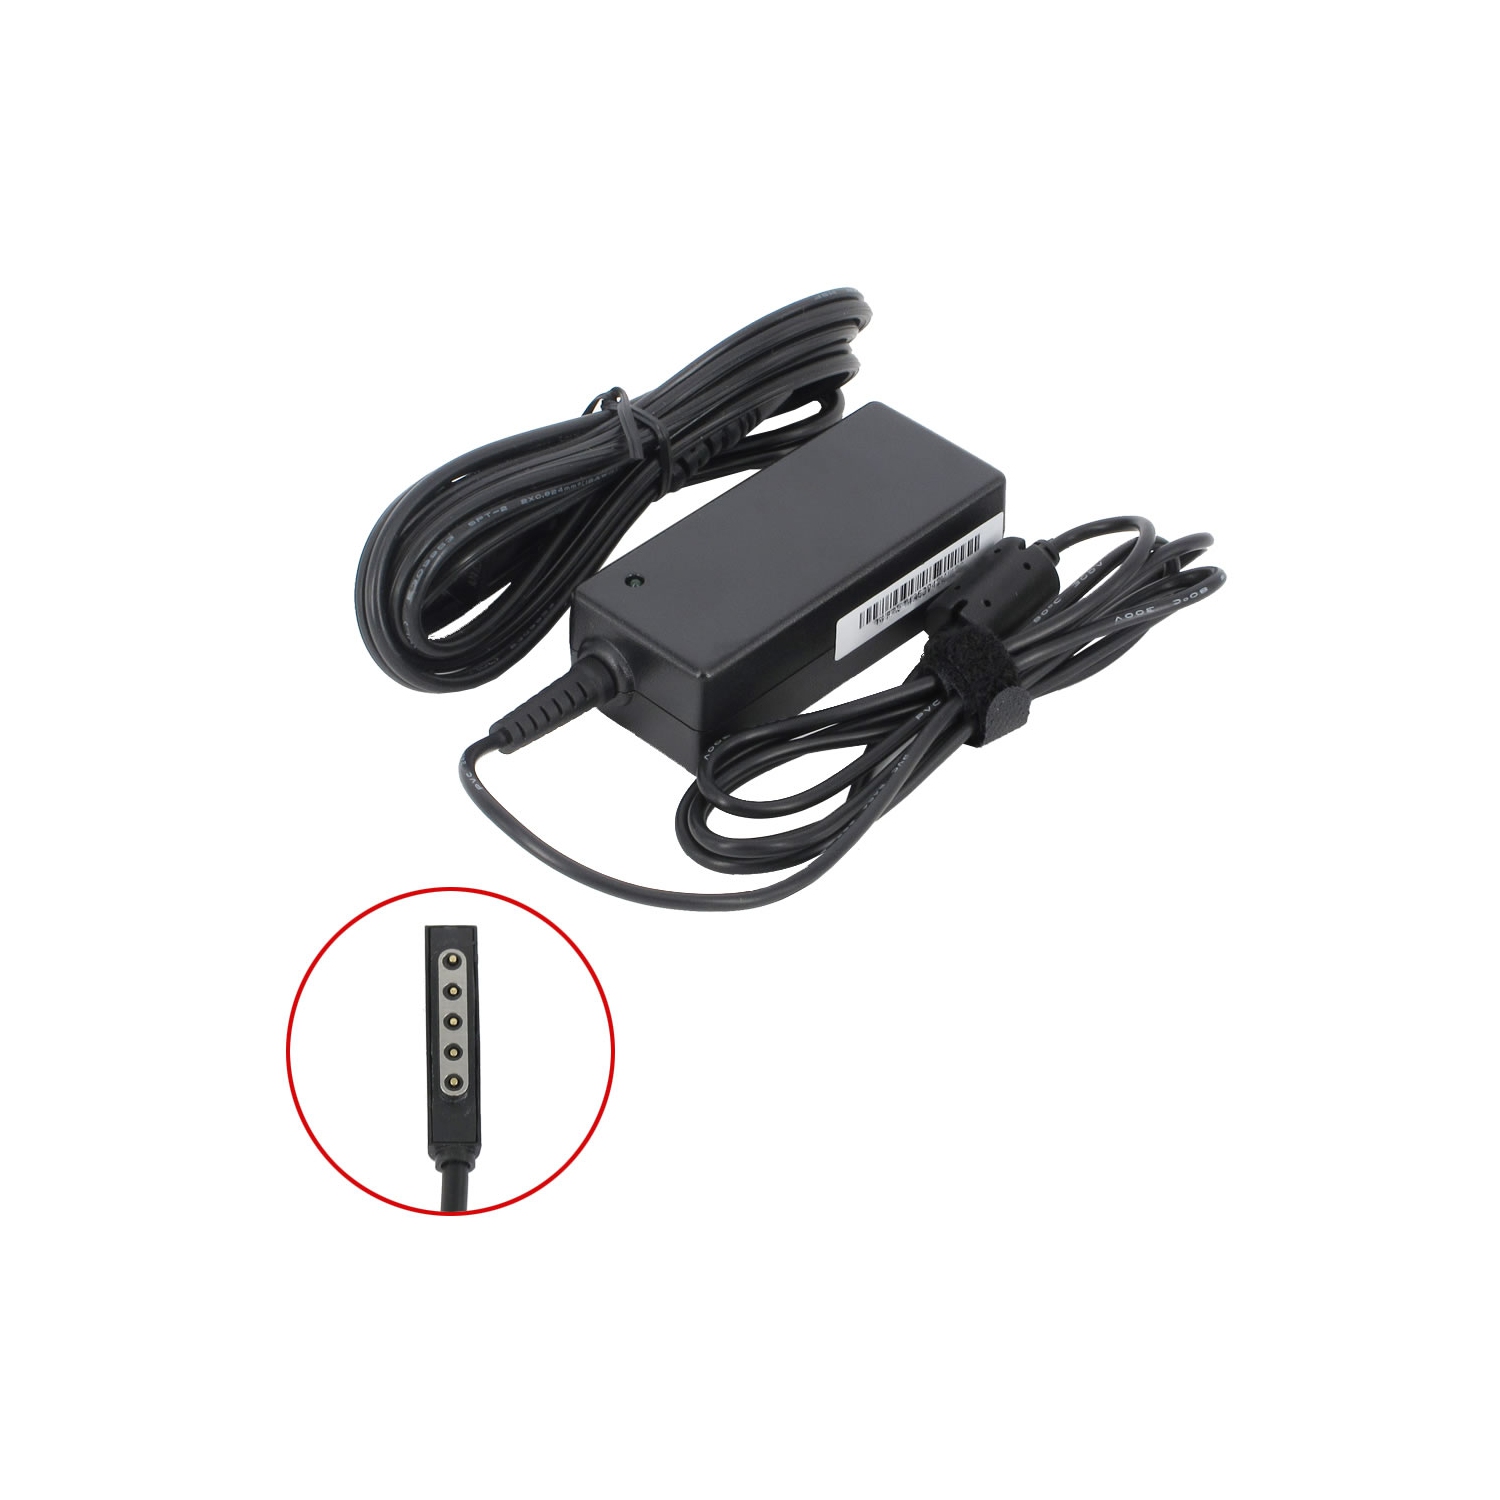 BattDepot: New Replacement Tablet AC Adapter for Microsoft Surface Pro, Q6T-00001 (12V 3.6A 45W)